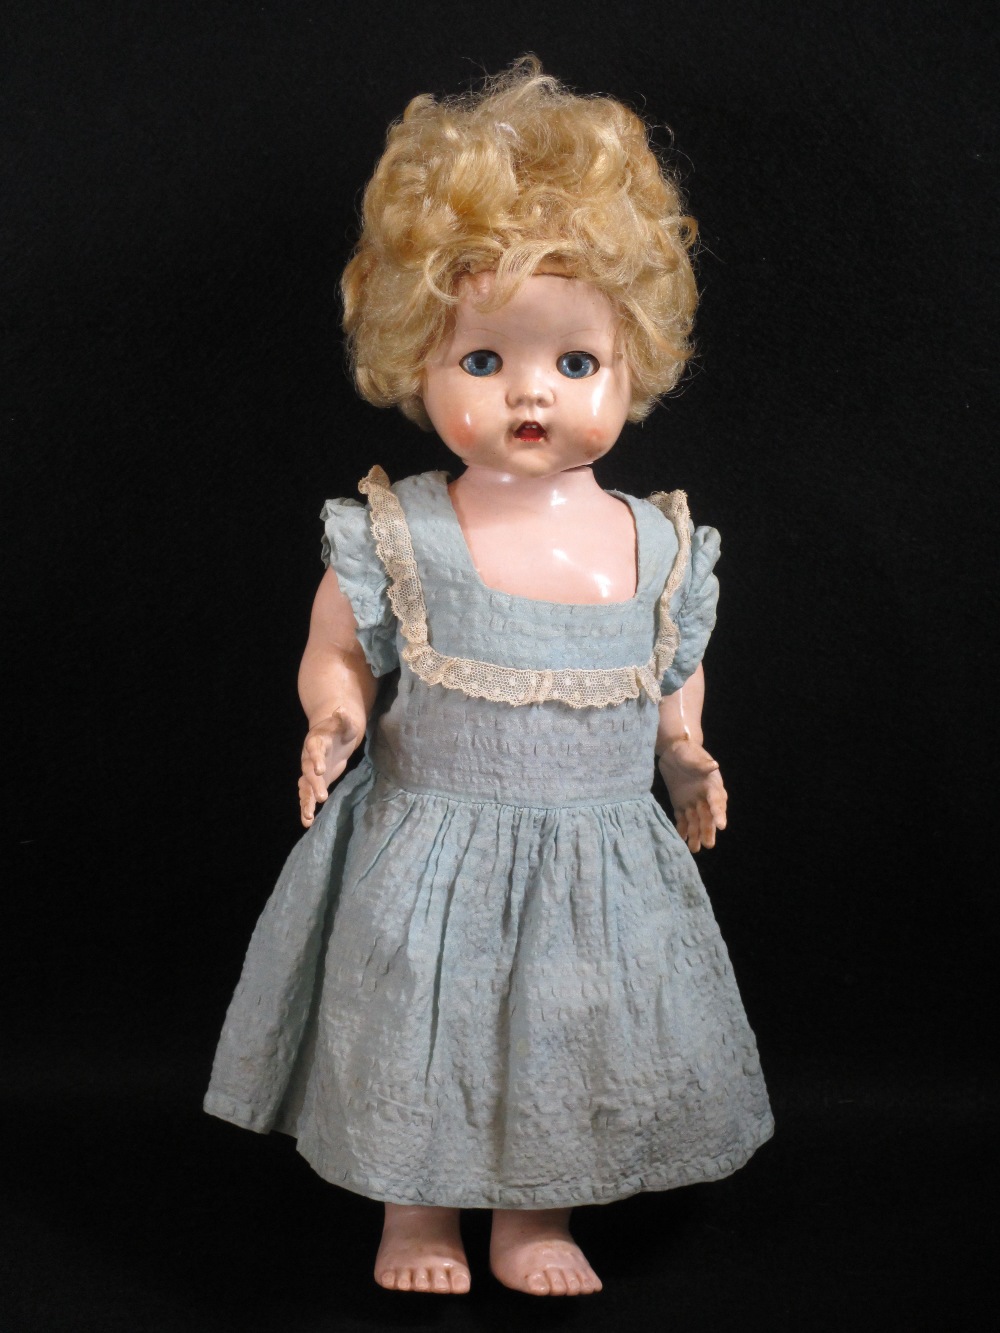 VINTAGE & MODERN COLLECTOR'S DOLLS by Pedigree and Ashton Drake Galleries (5) - Image 6 of 7